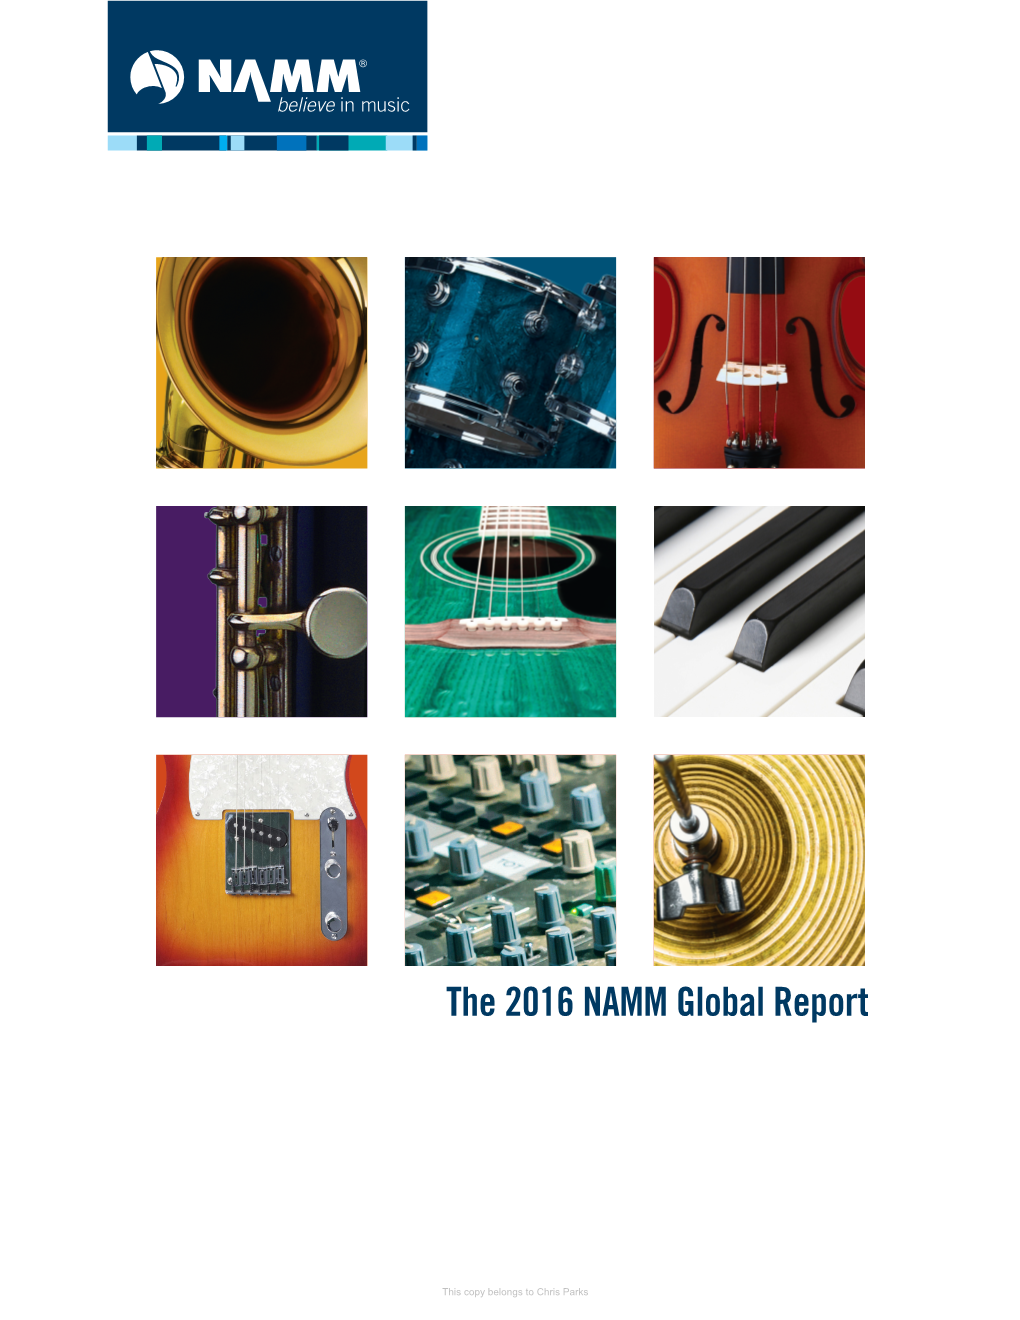 The 2016 NAMM Global Report